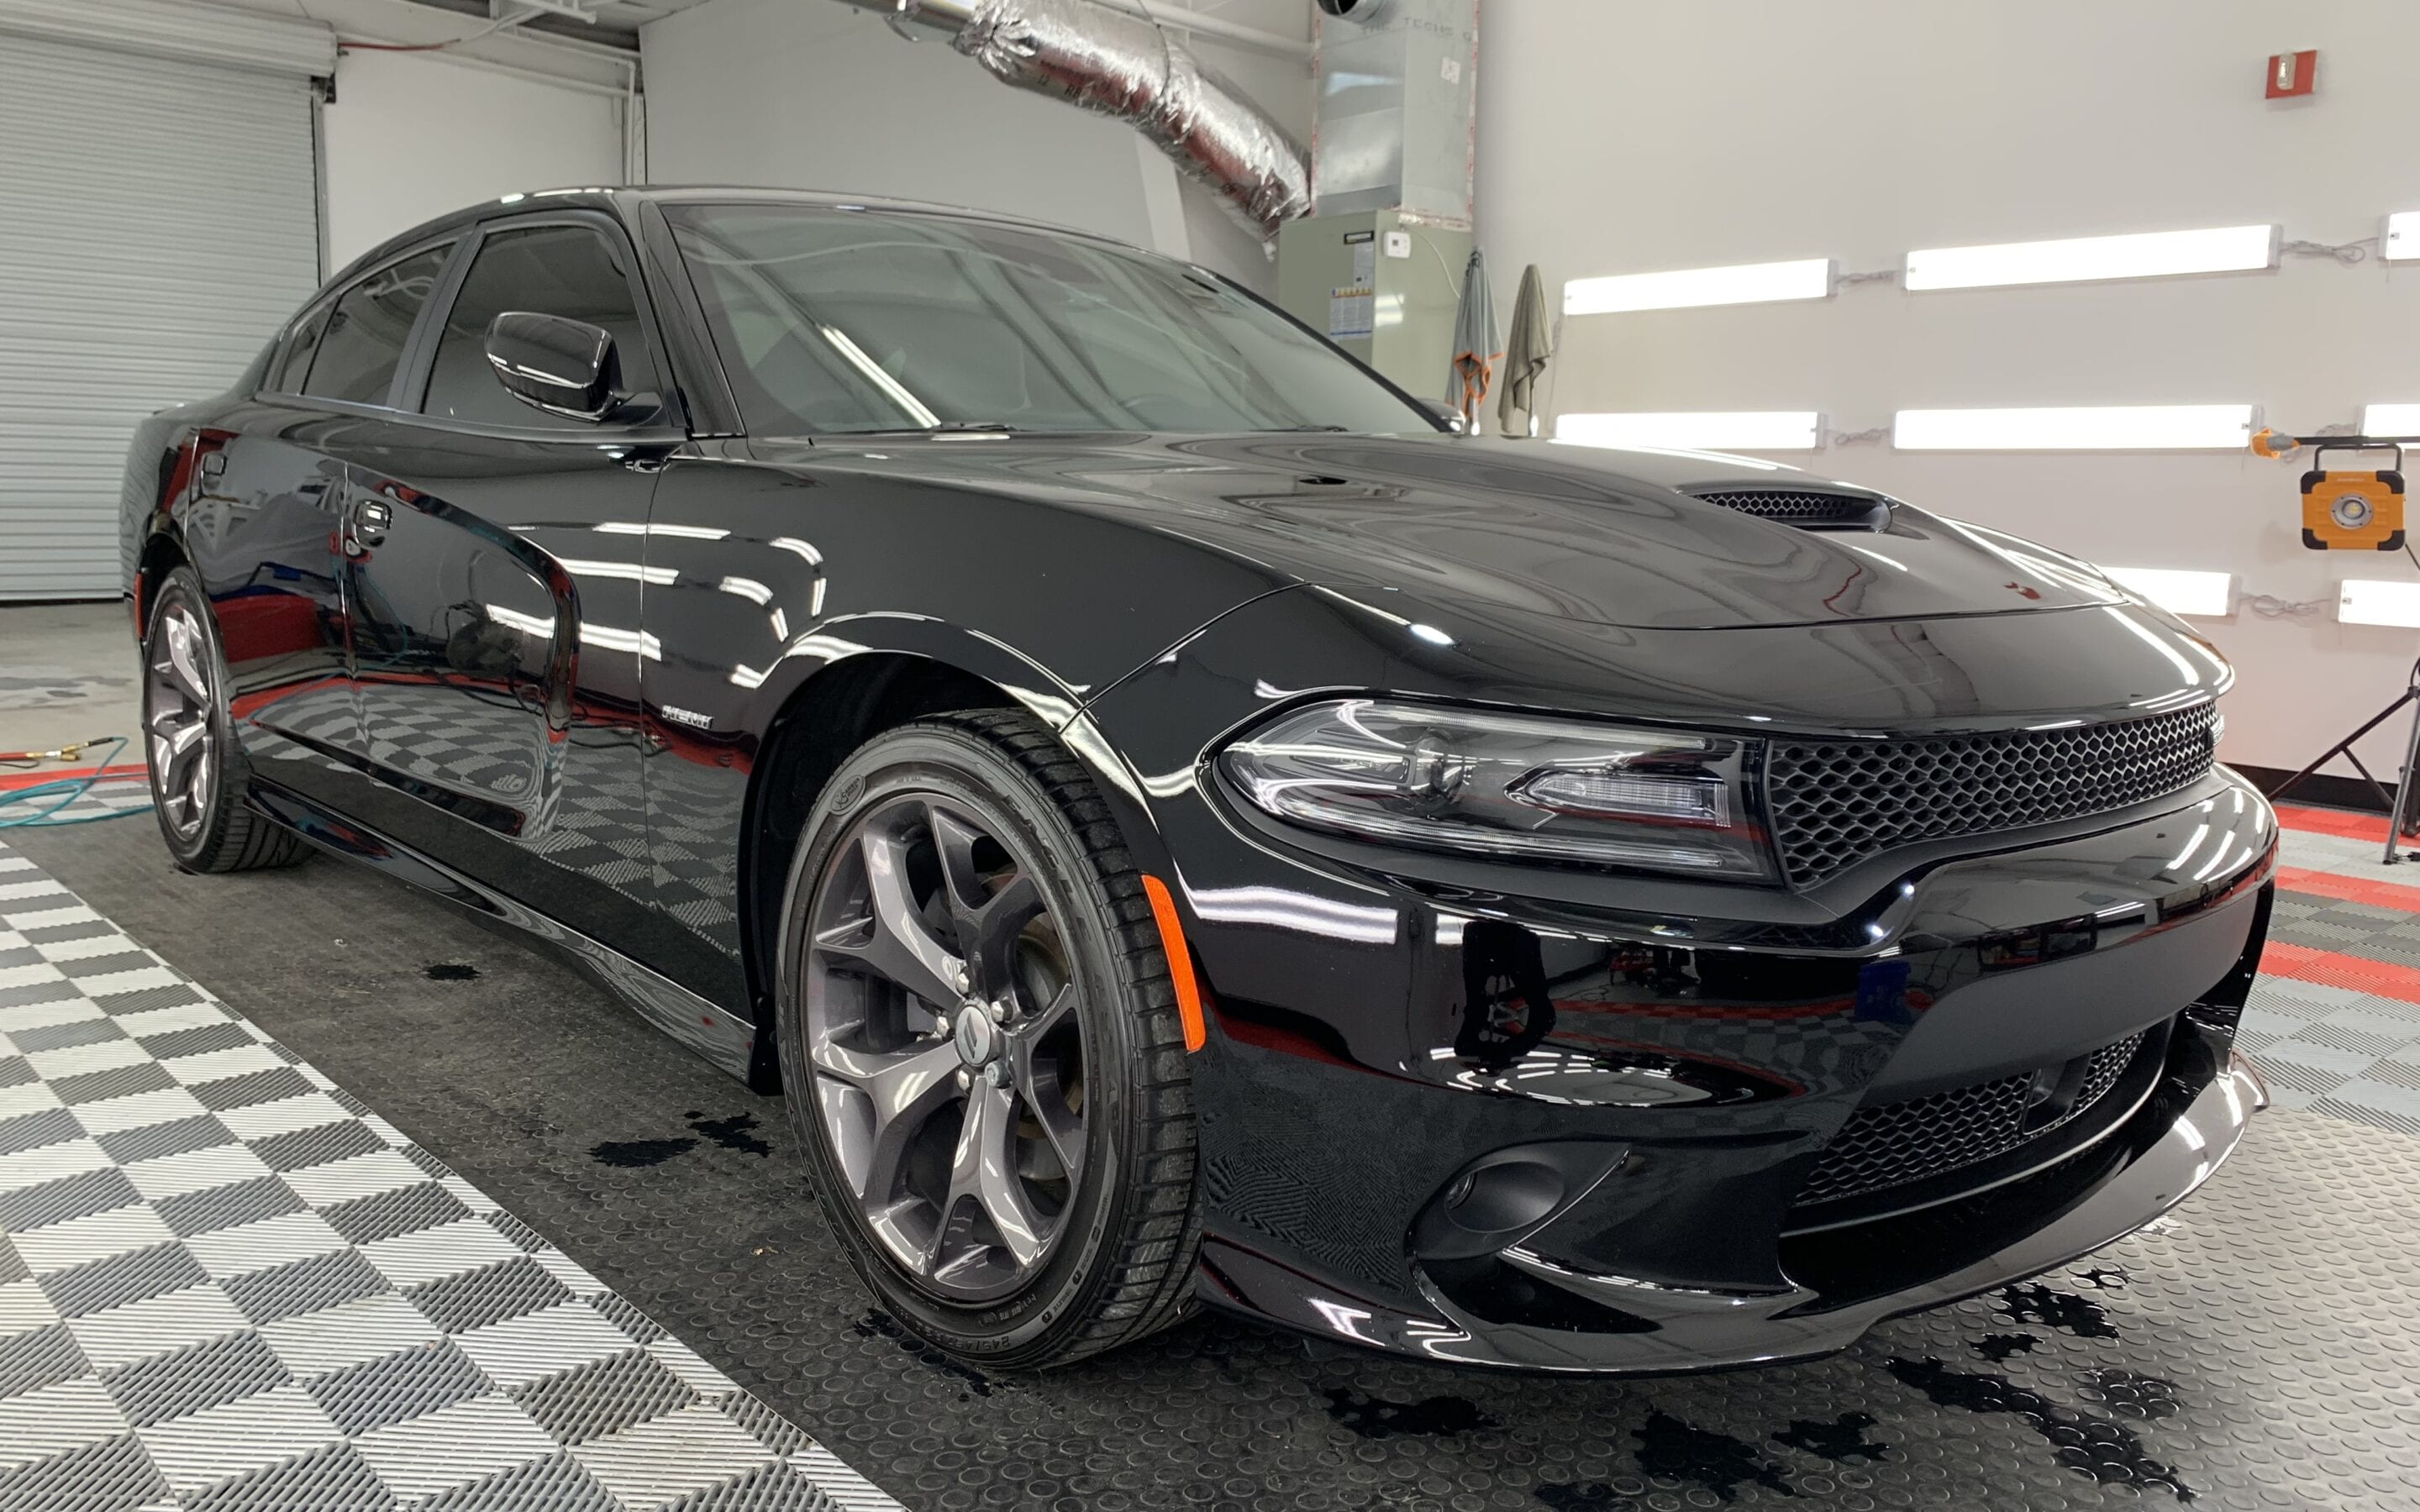 Ceramic Coating of a 2018 Dodge Charger